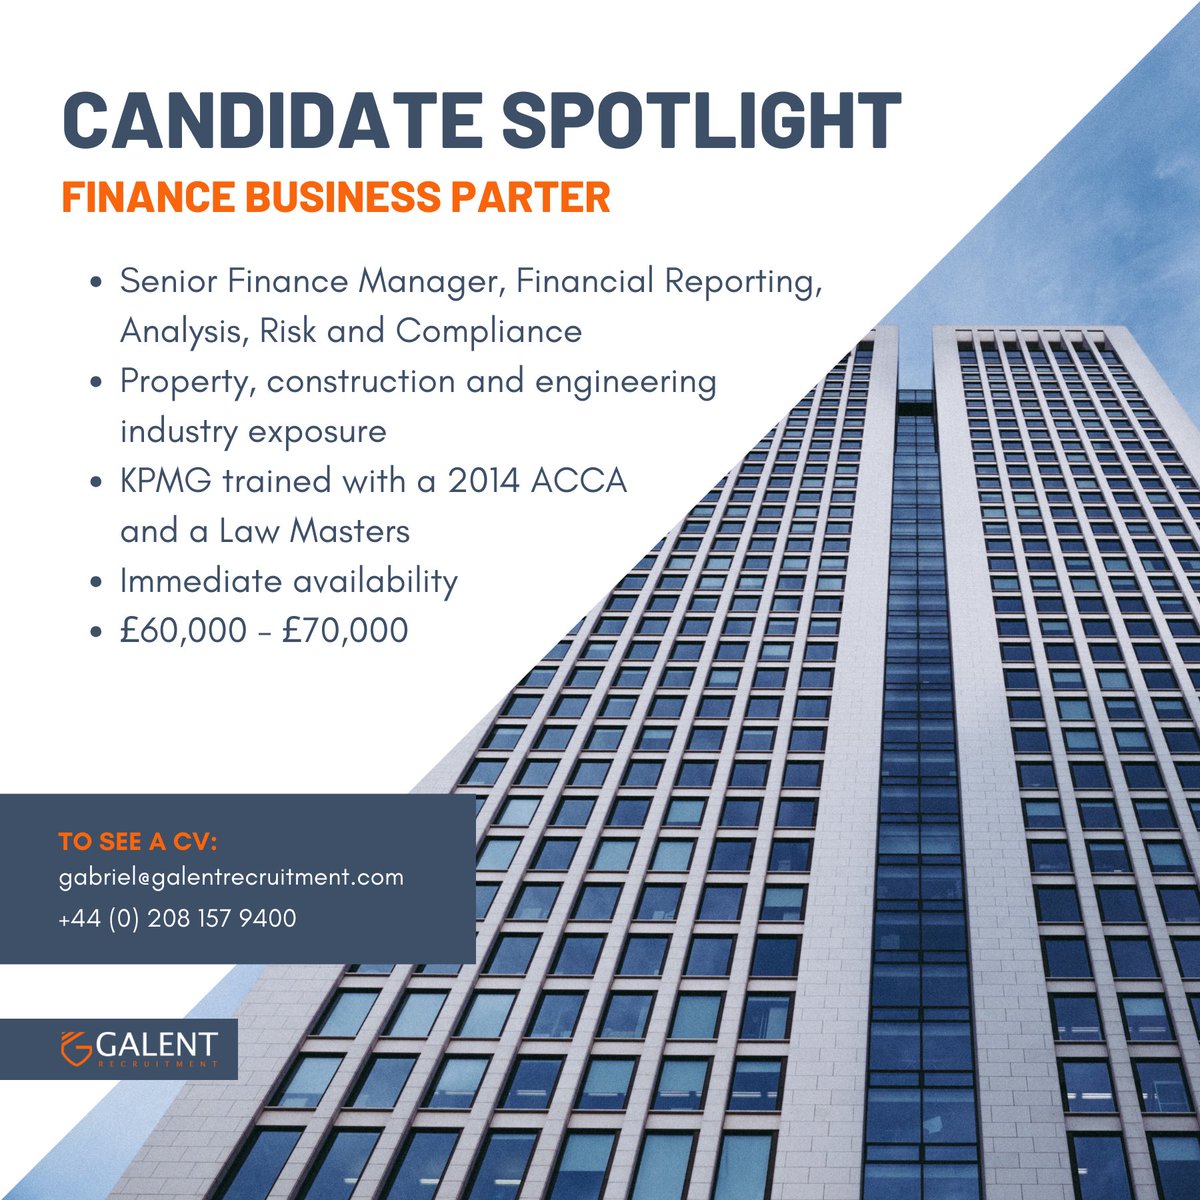 If you are in the market for a Finance Business Partner or an FP&A specialist please get in touch and request for a CV.

#galentrecruitment #candidatespotlight #financebusinesspartner #availableimmediately